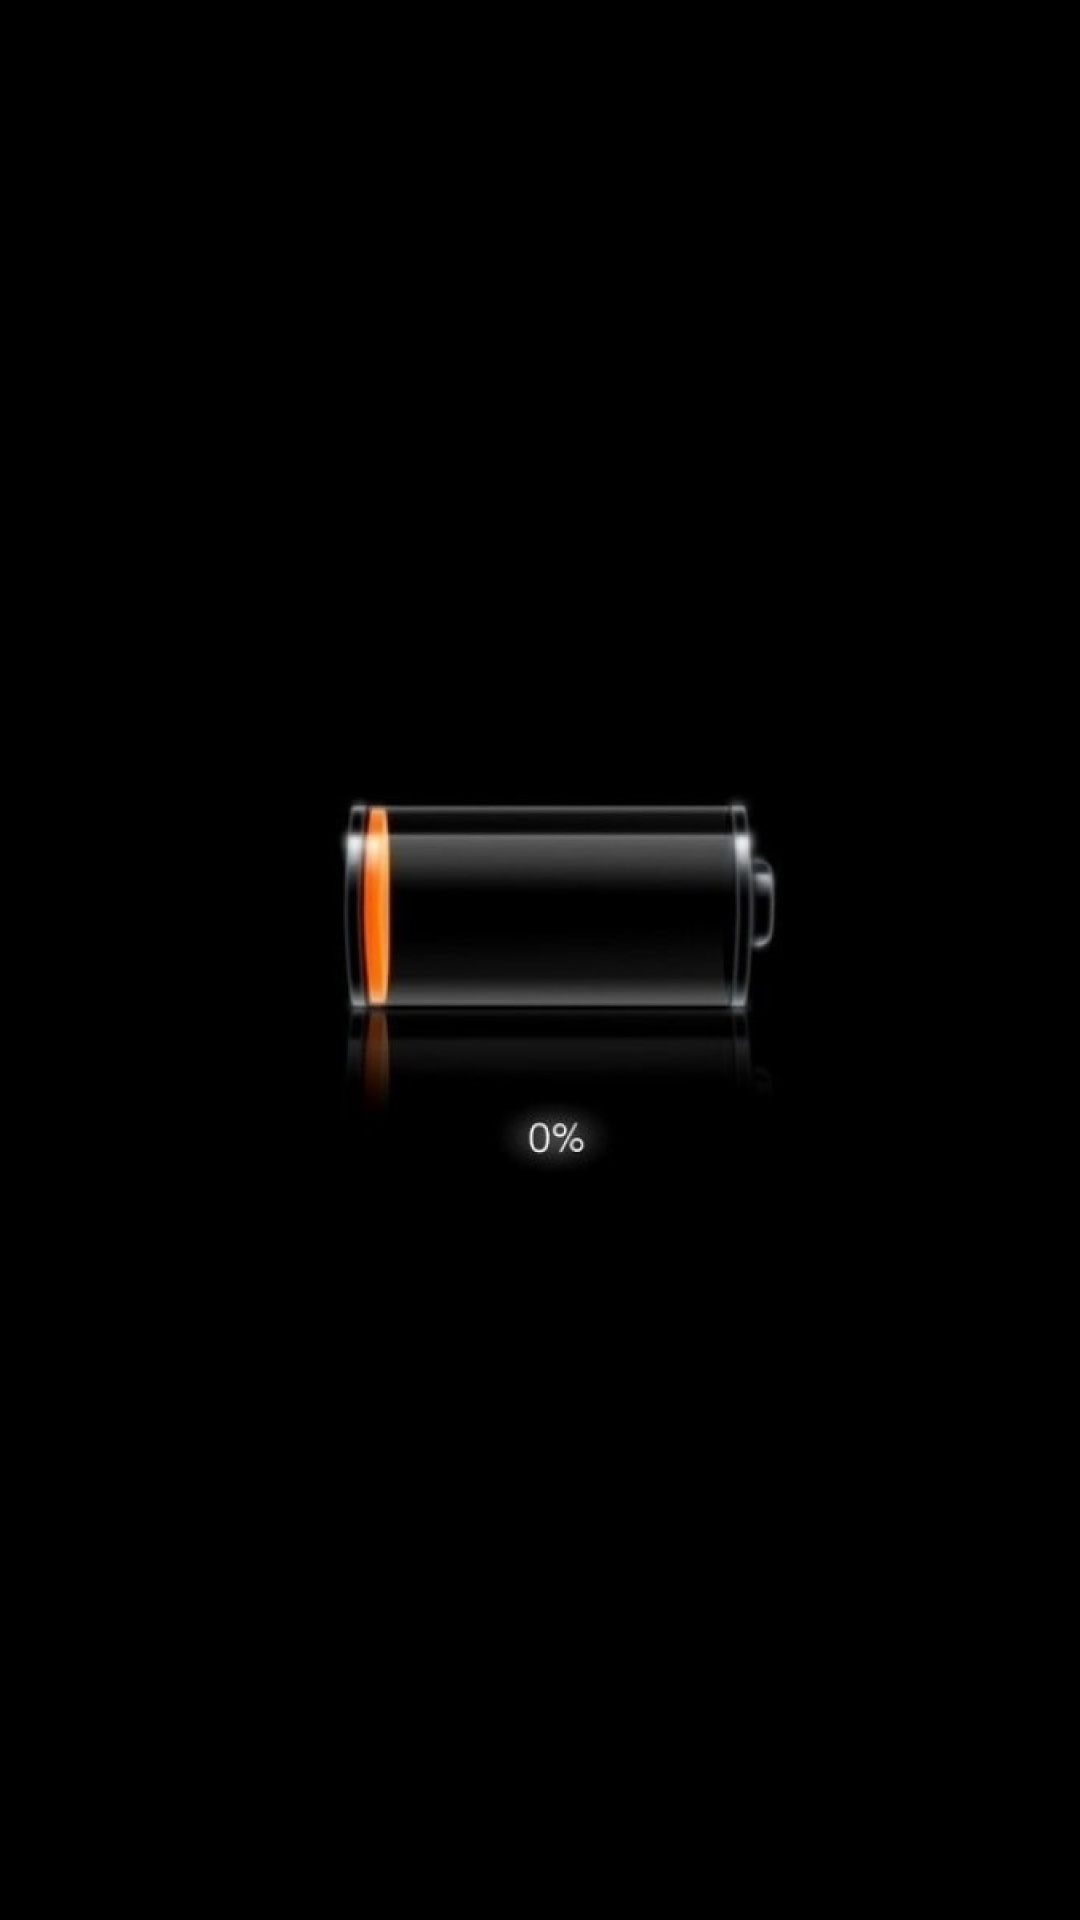 Battery Charge wallpaper 1080x1920